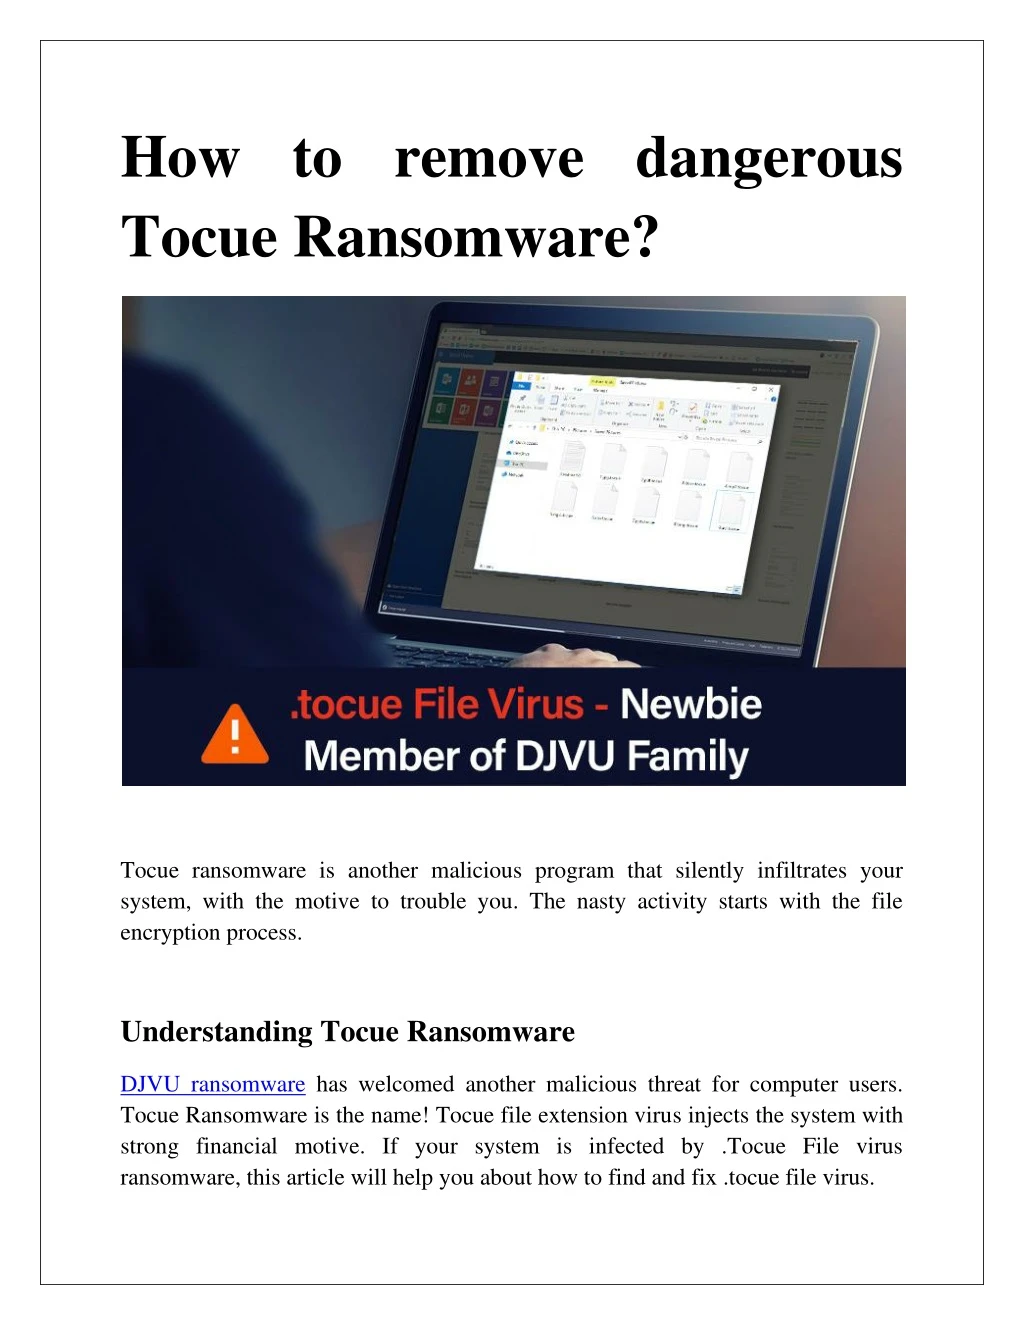 how to remove dangerous tocue ransomware